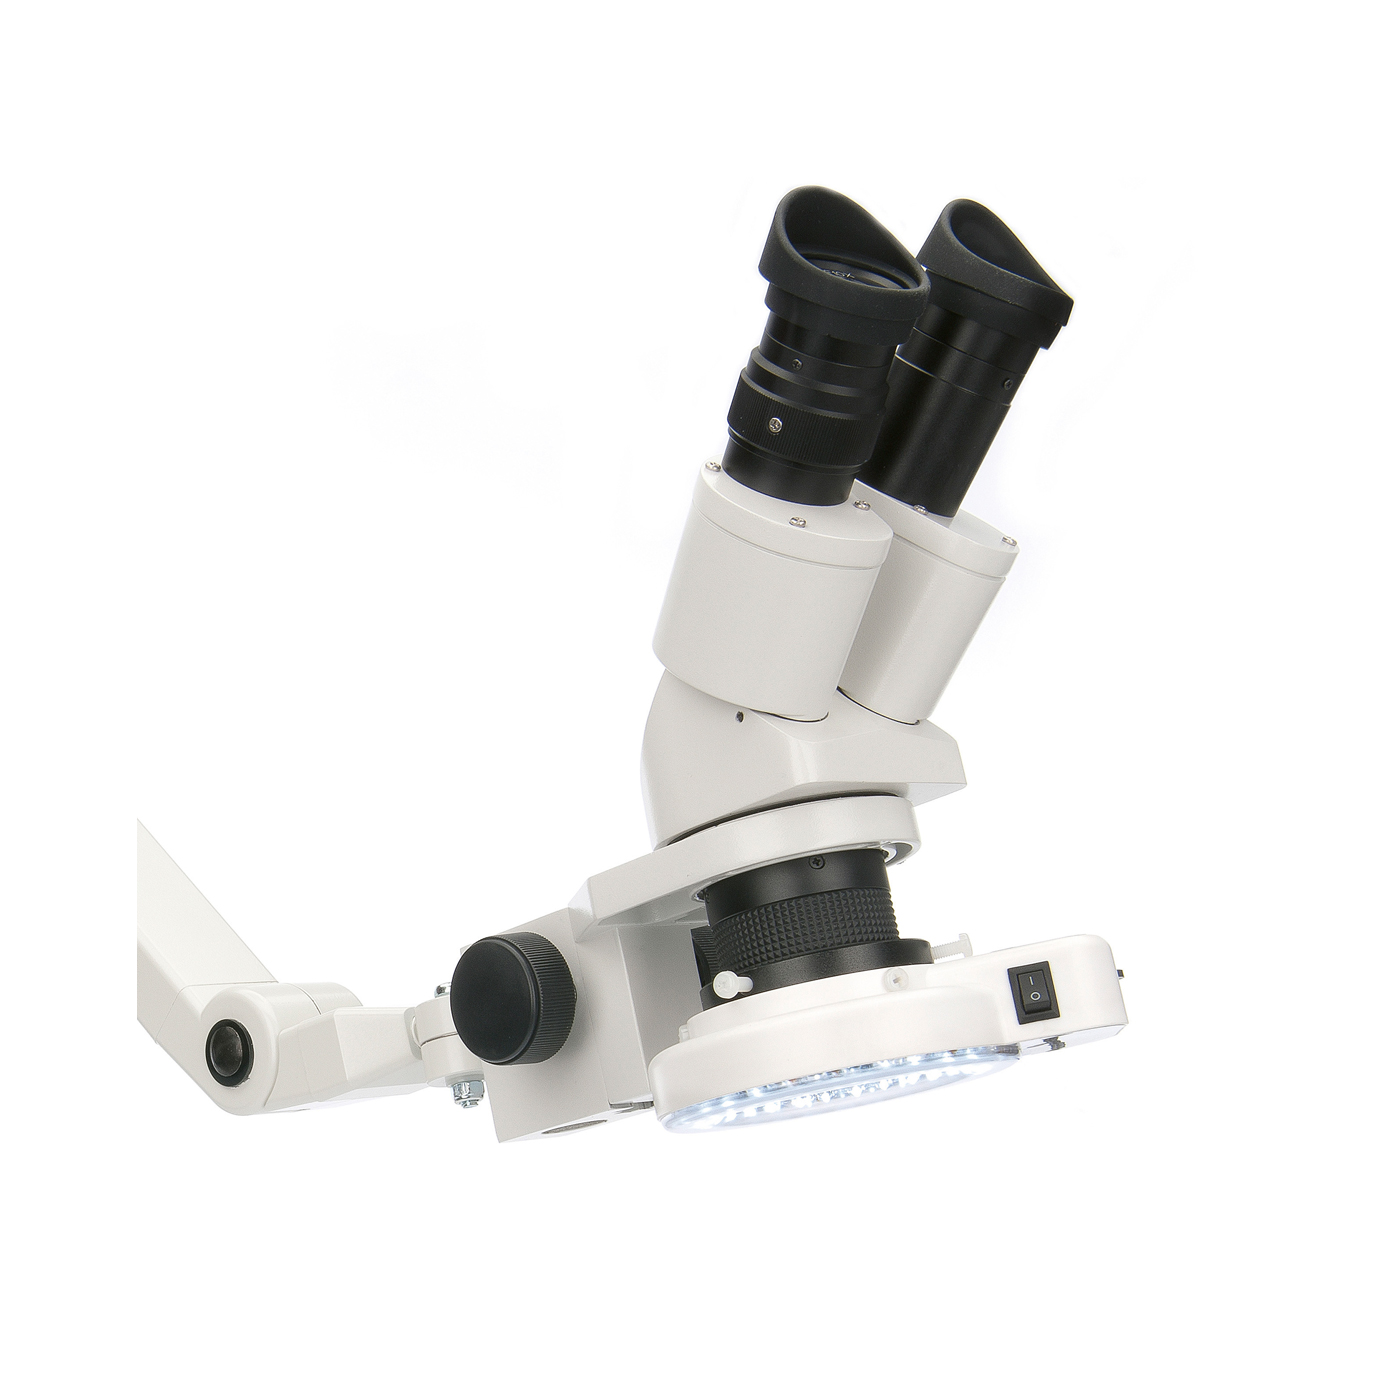 FINO Stereo Microscope with Hinged Arm - 1 piece